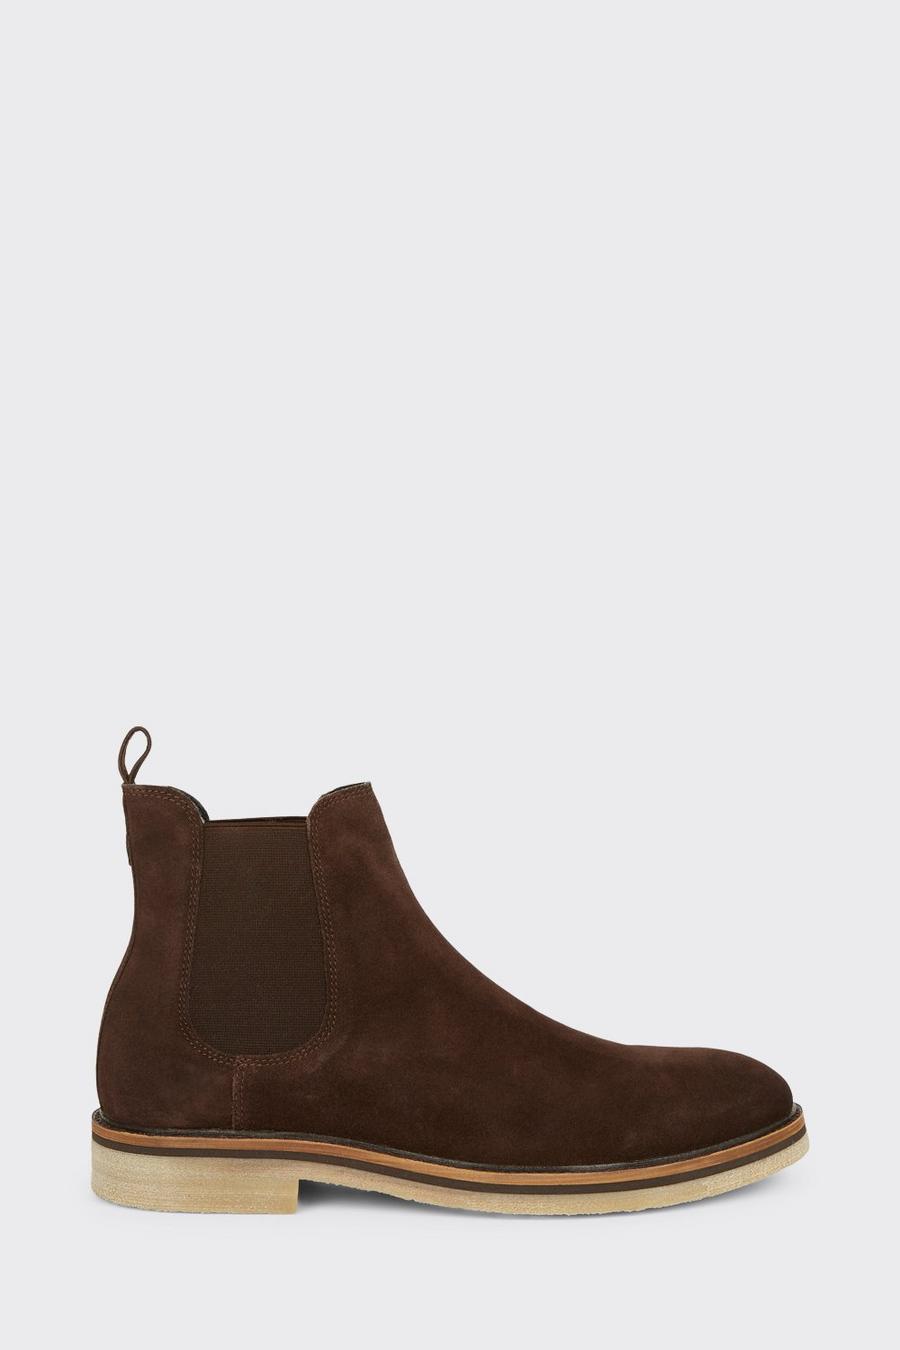 Suede Chocolate Chelsea Boots